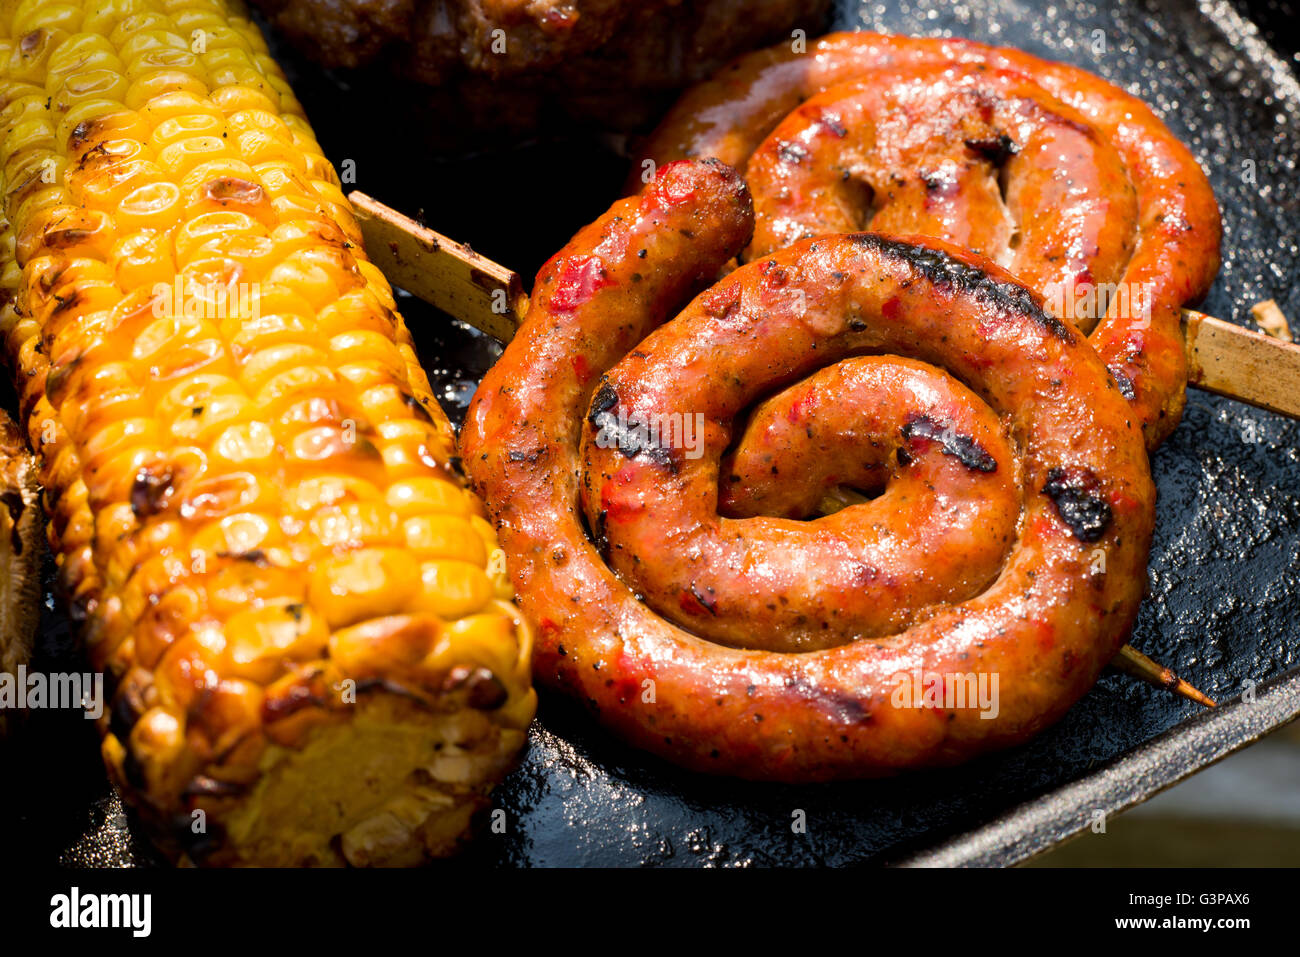 Circular coiled sausages on a barbeque. Spiral of sausage with a wooden skewer. Corn on the cob or maize on a barbecue. Stock Photo